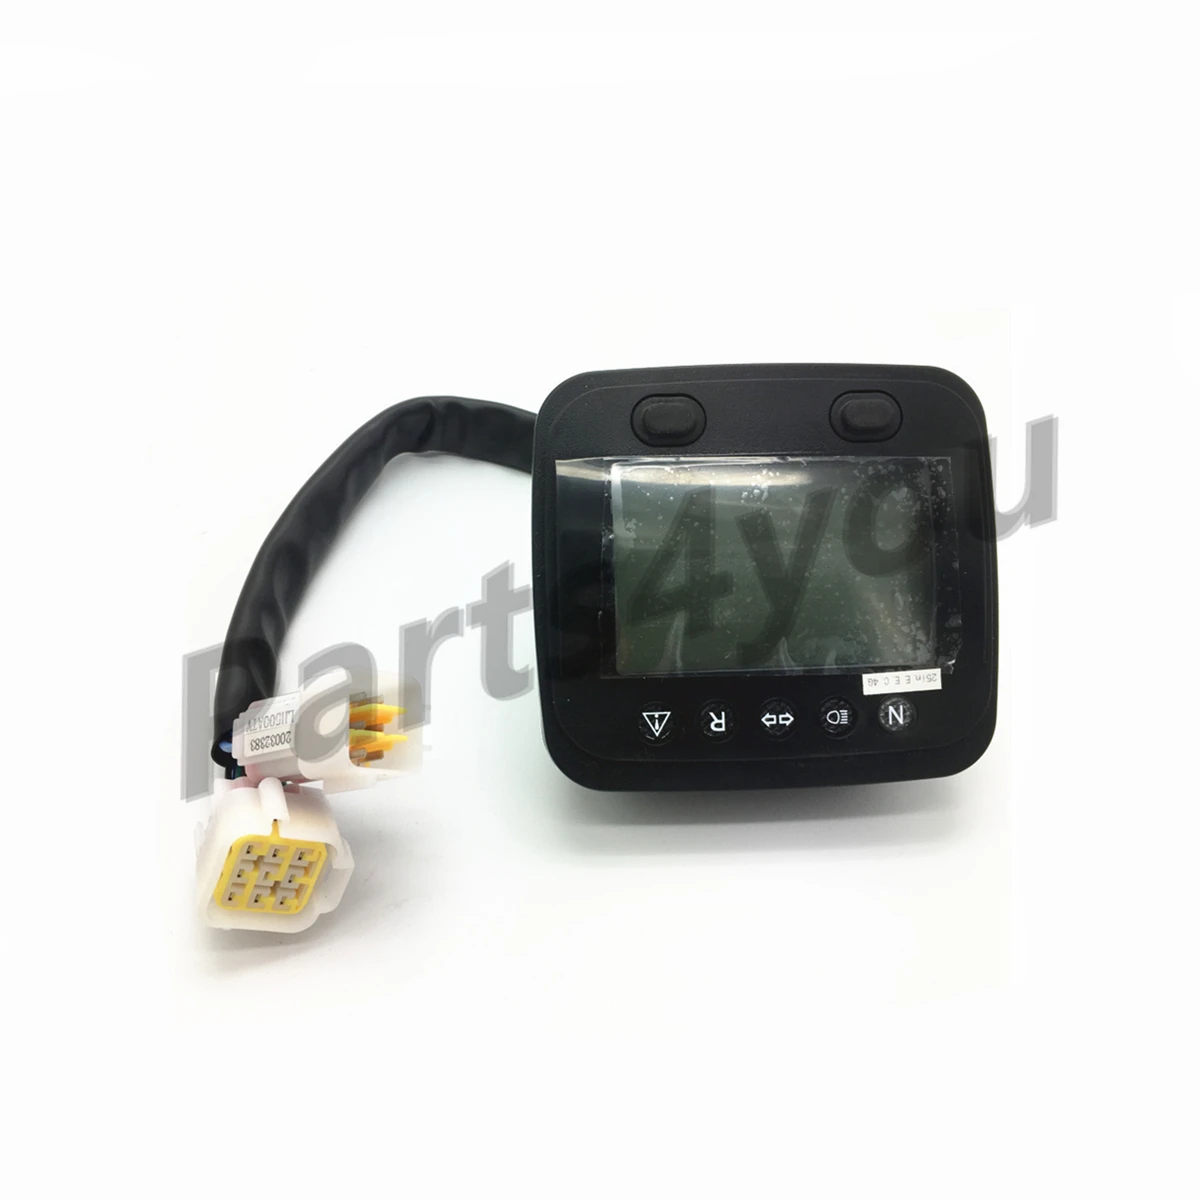 Dashboard LCD SPEEDOMETER Meter Assy for LINHAI 500 ATV-D T3B 500 ATV-D M565LI EFI T3 500 LH500 Bighorn 450 LH450 LH500 35089